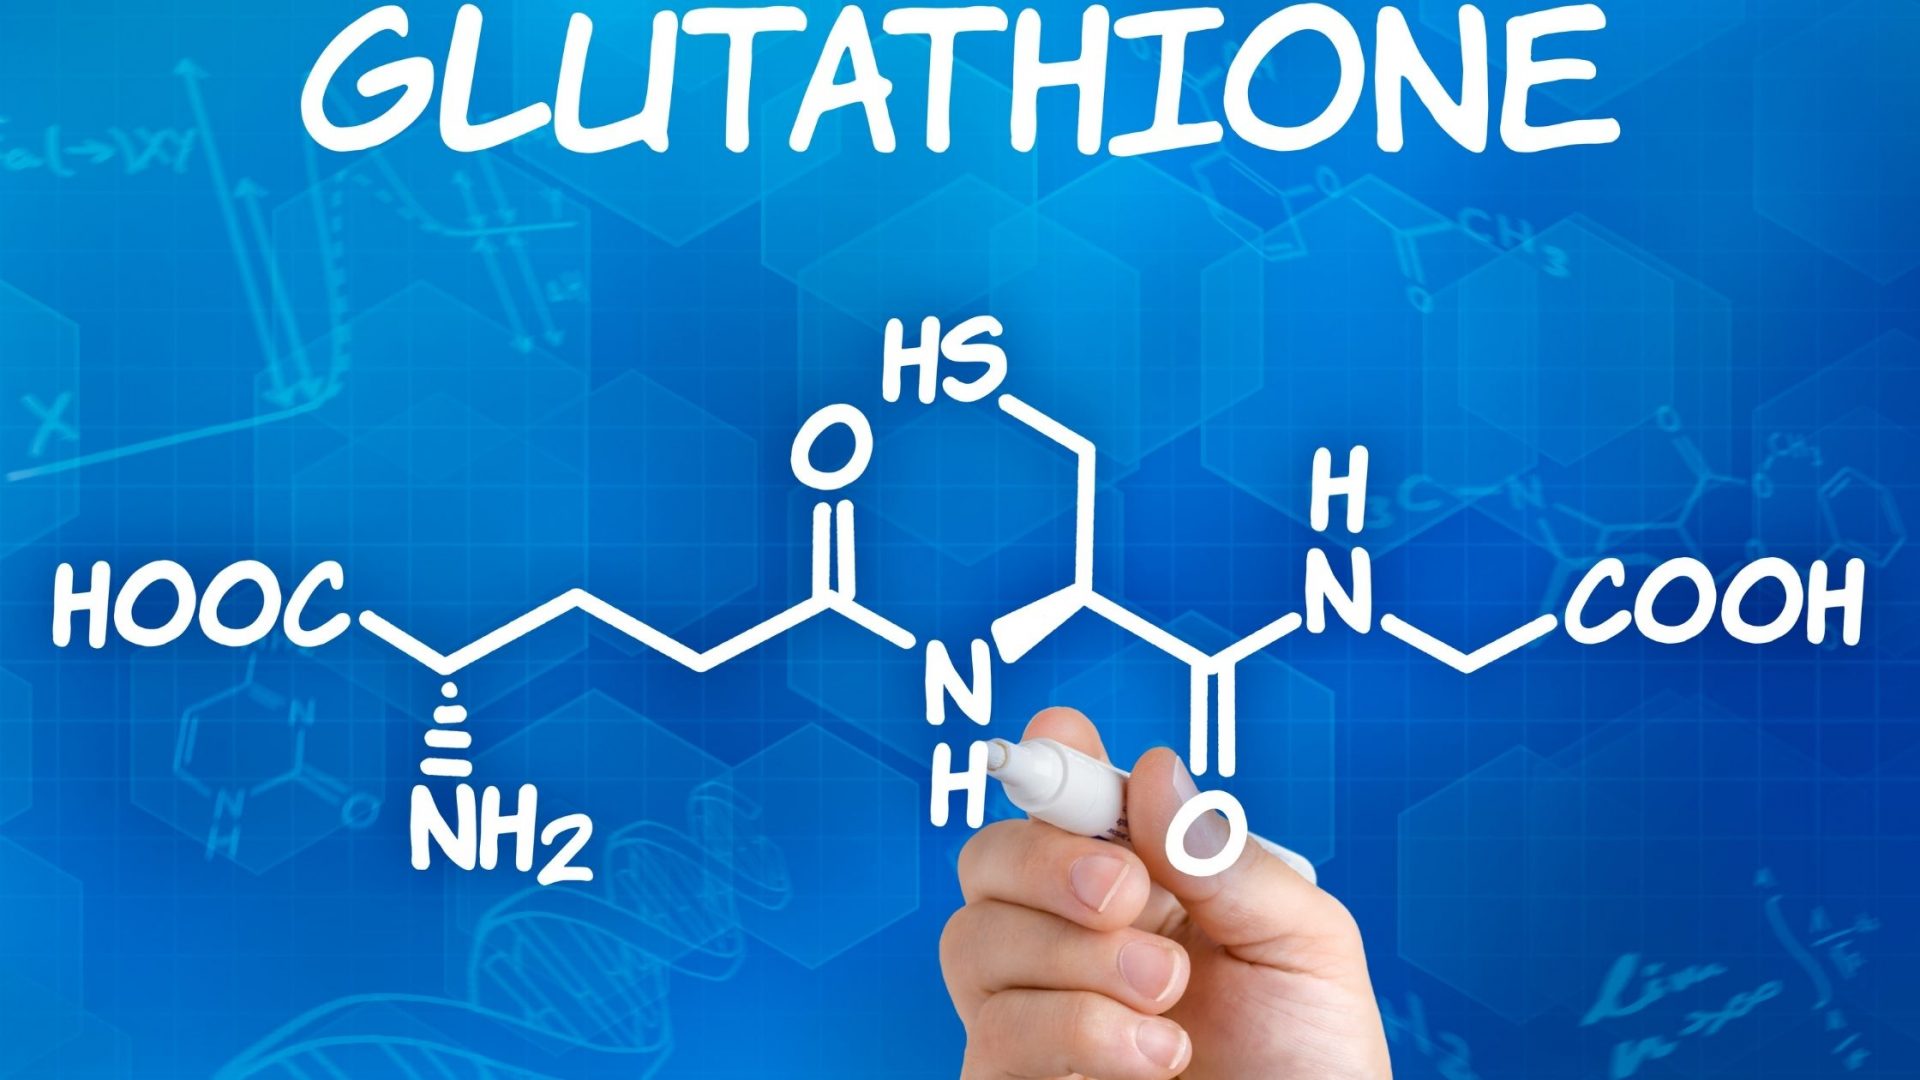 Glutathione - Overview